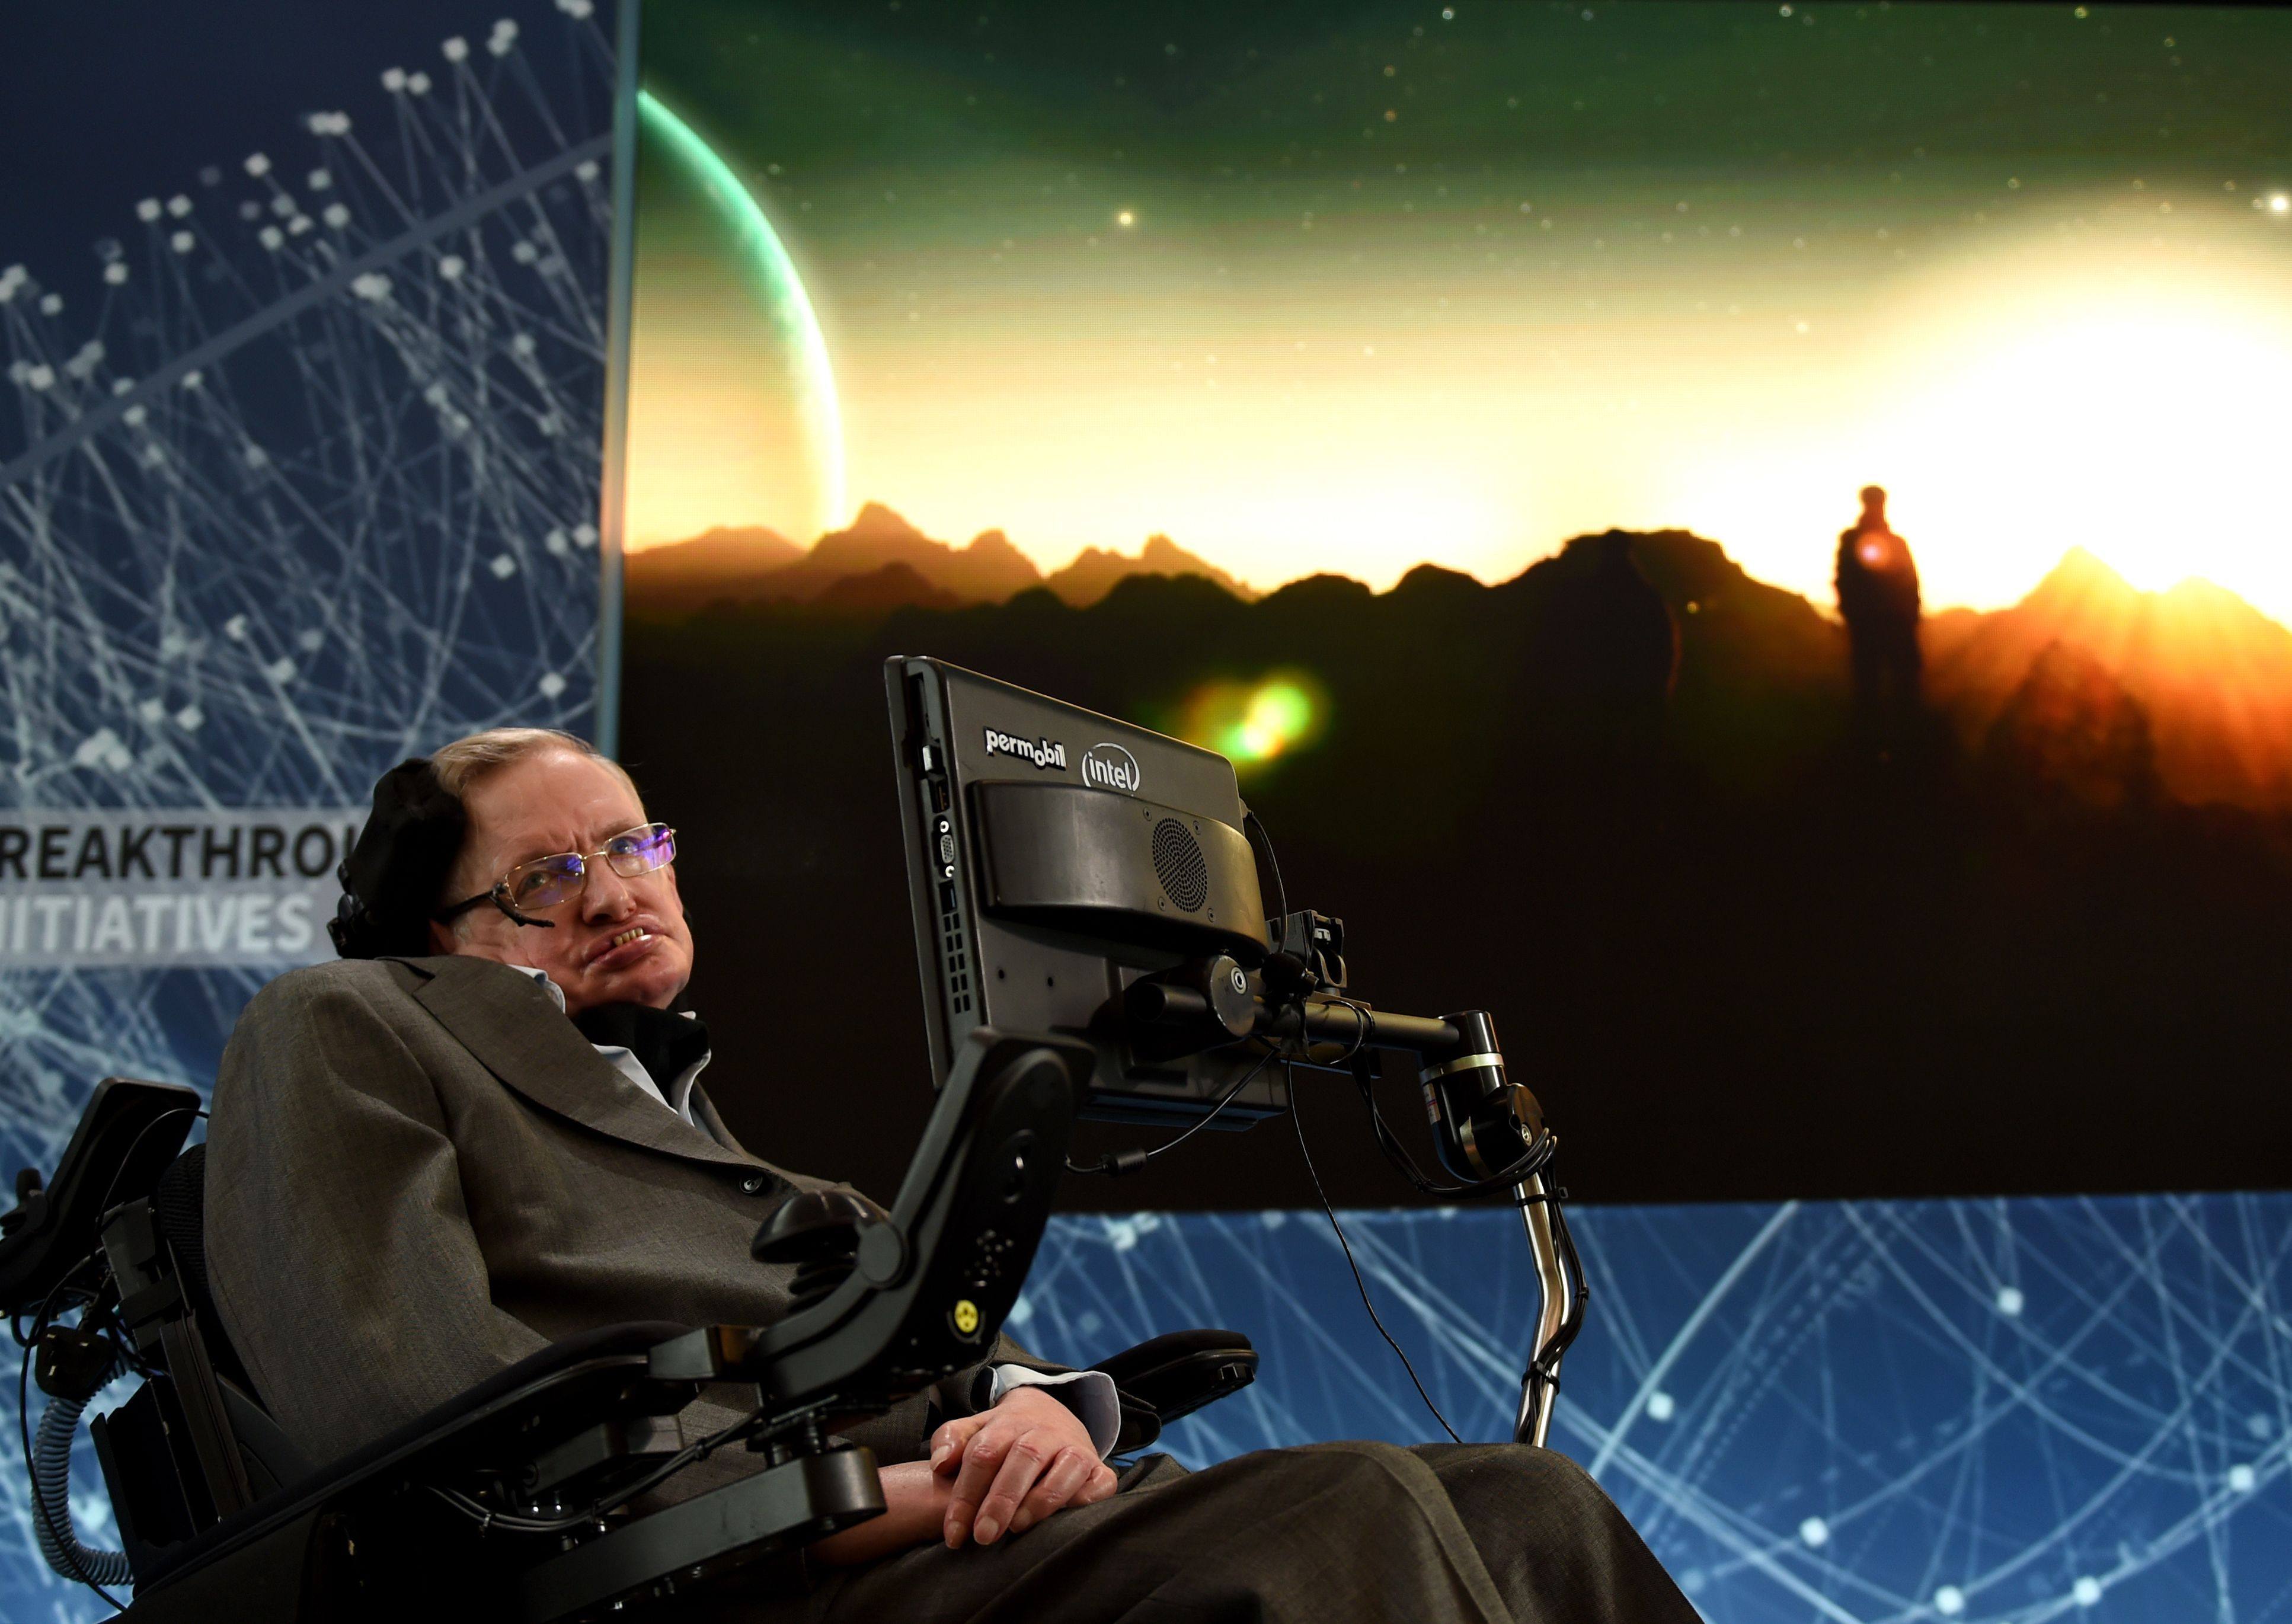 Professor Stephen Hawking attends a press conference at One World Observatory in New York in April 2016. Photo: AFP